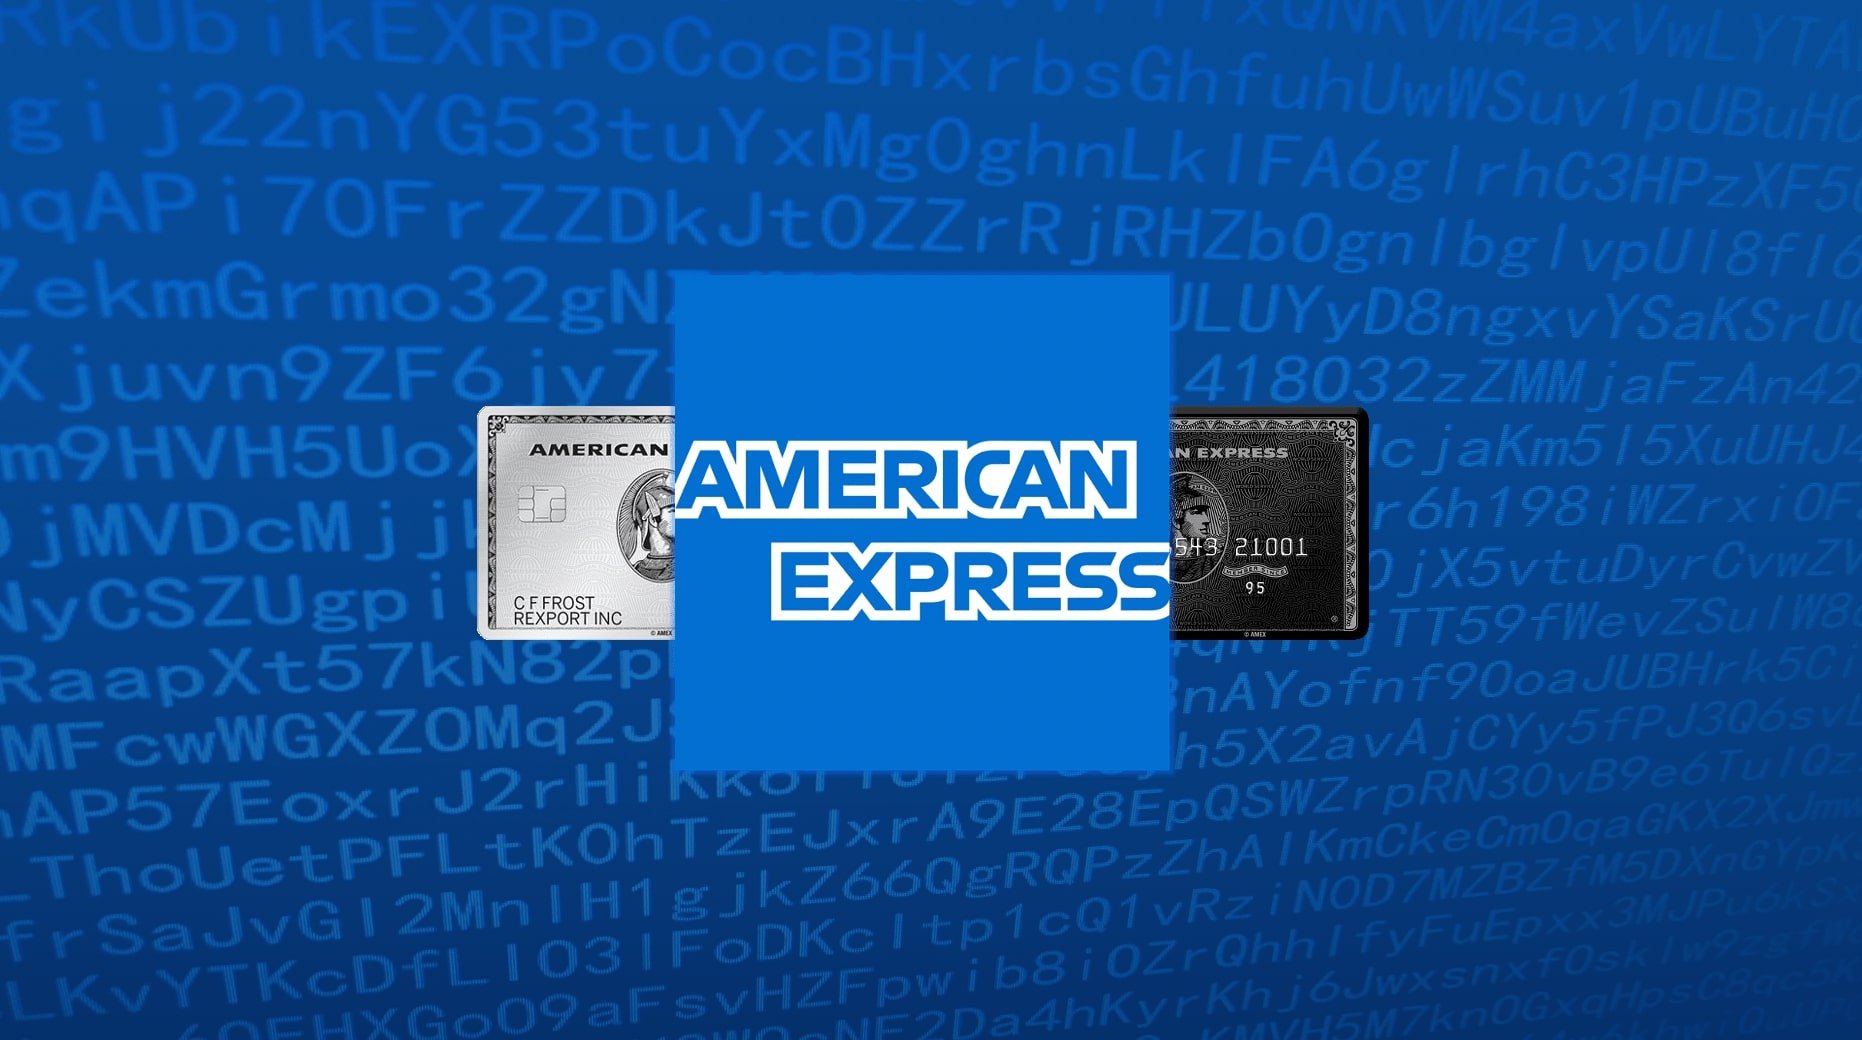 cybercriminal-posts-data-of-10,000-american-express-accounts-for-free-on-hacker-forum